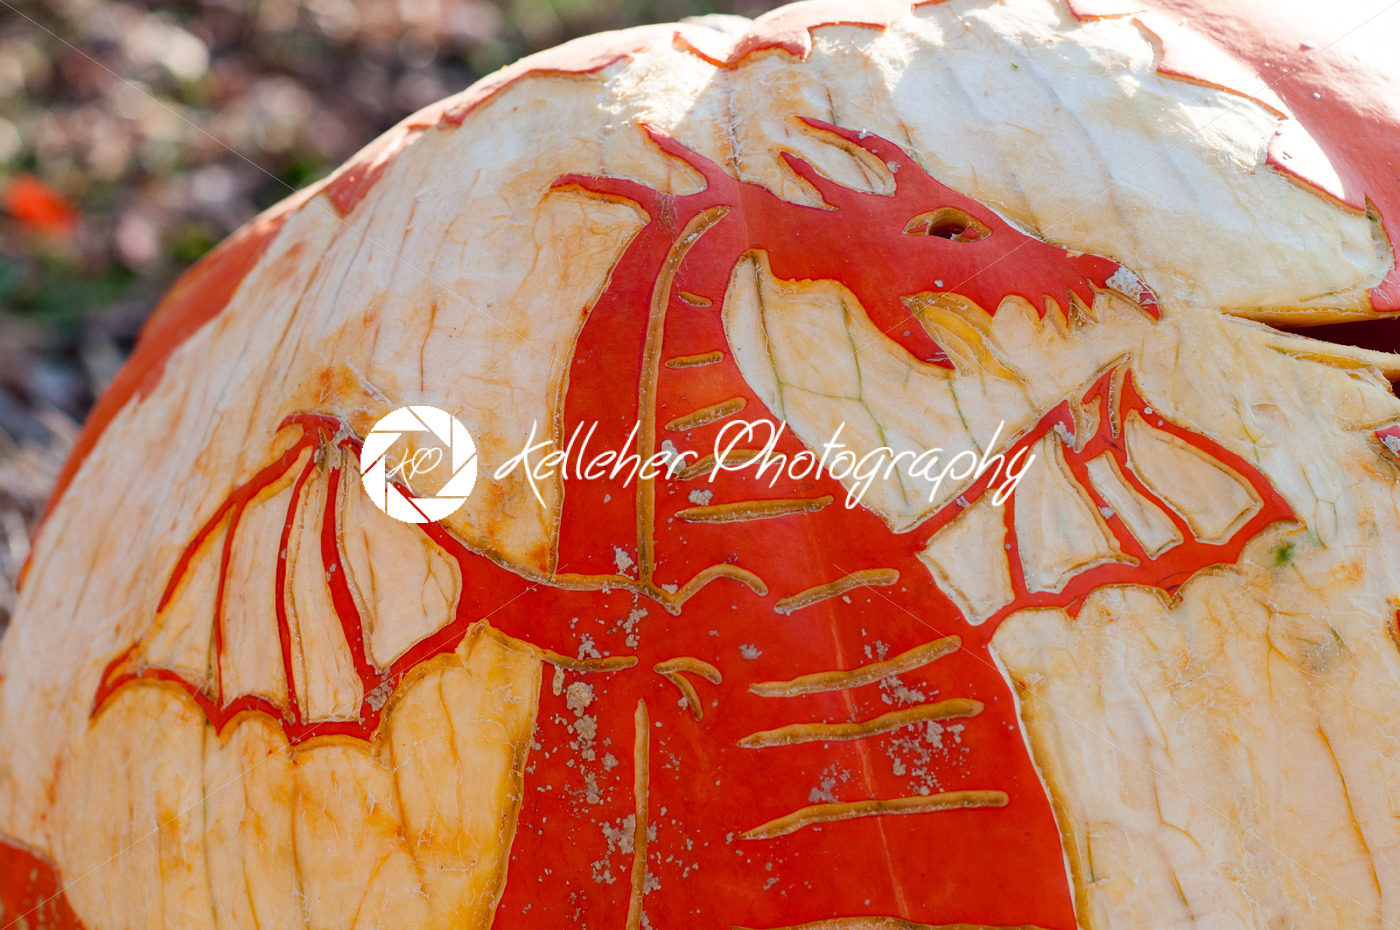 CHADDS FORD, PA – OCTOBER 26: Dragon Pumpkin at The Great Pumpkin Carve carving contest on October 26, 2013 - Kelleher Photography Store